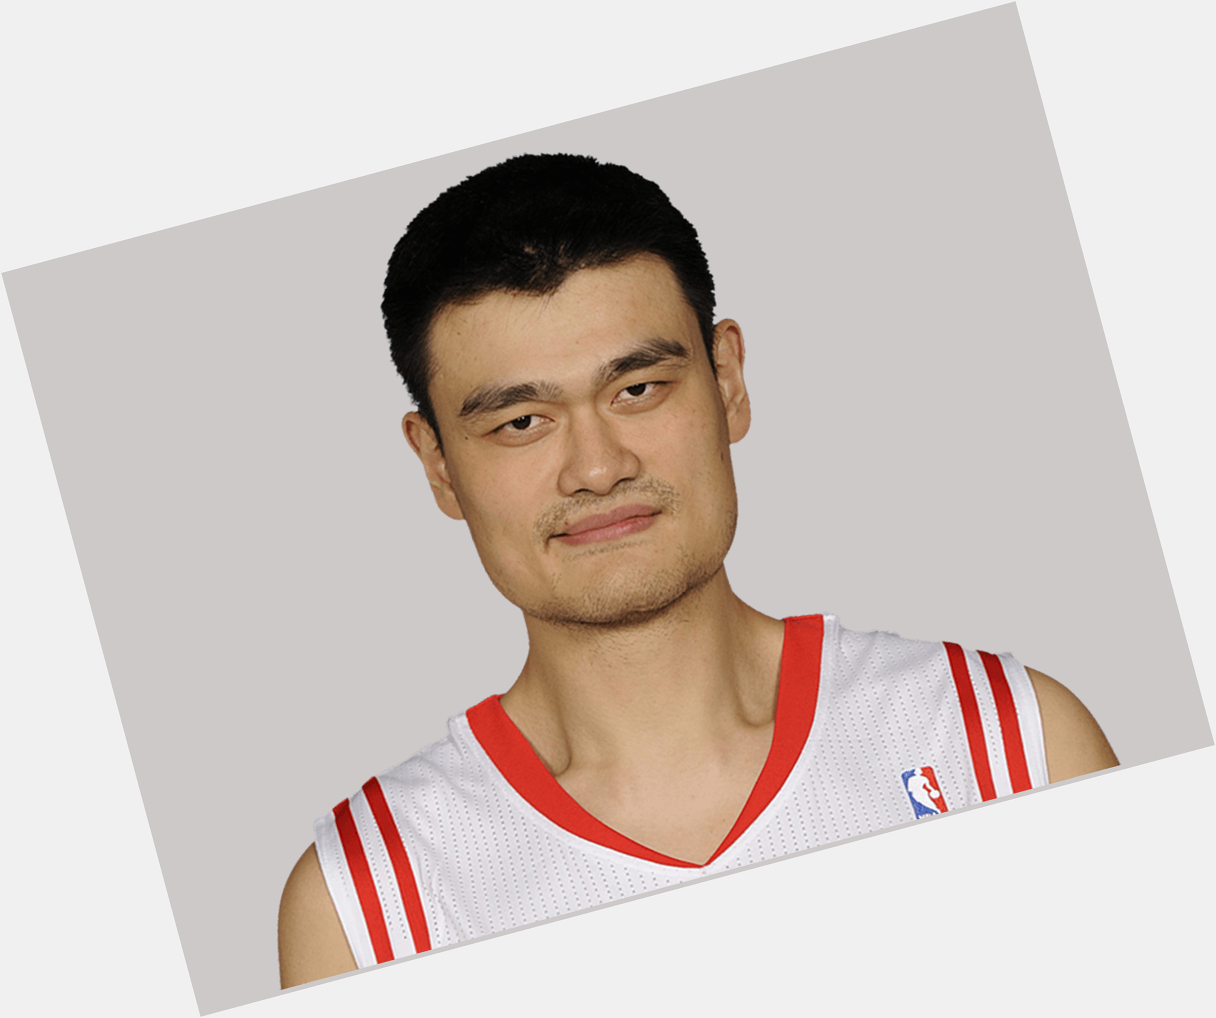 Happy 42nd birthday to (Yao Ming)! The Former Basketball Player 